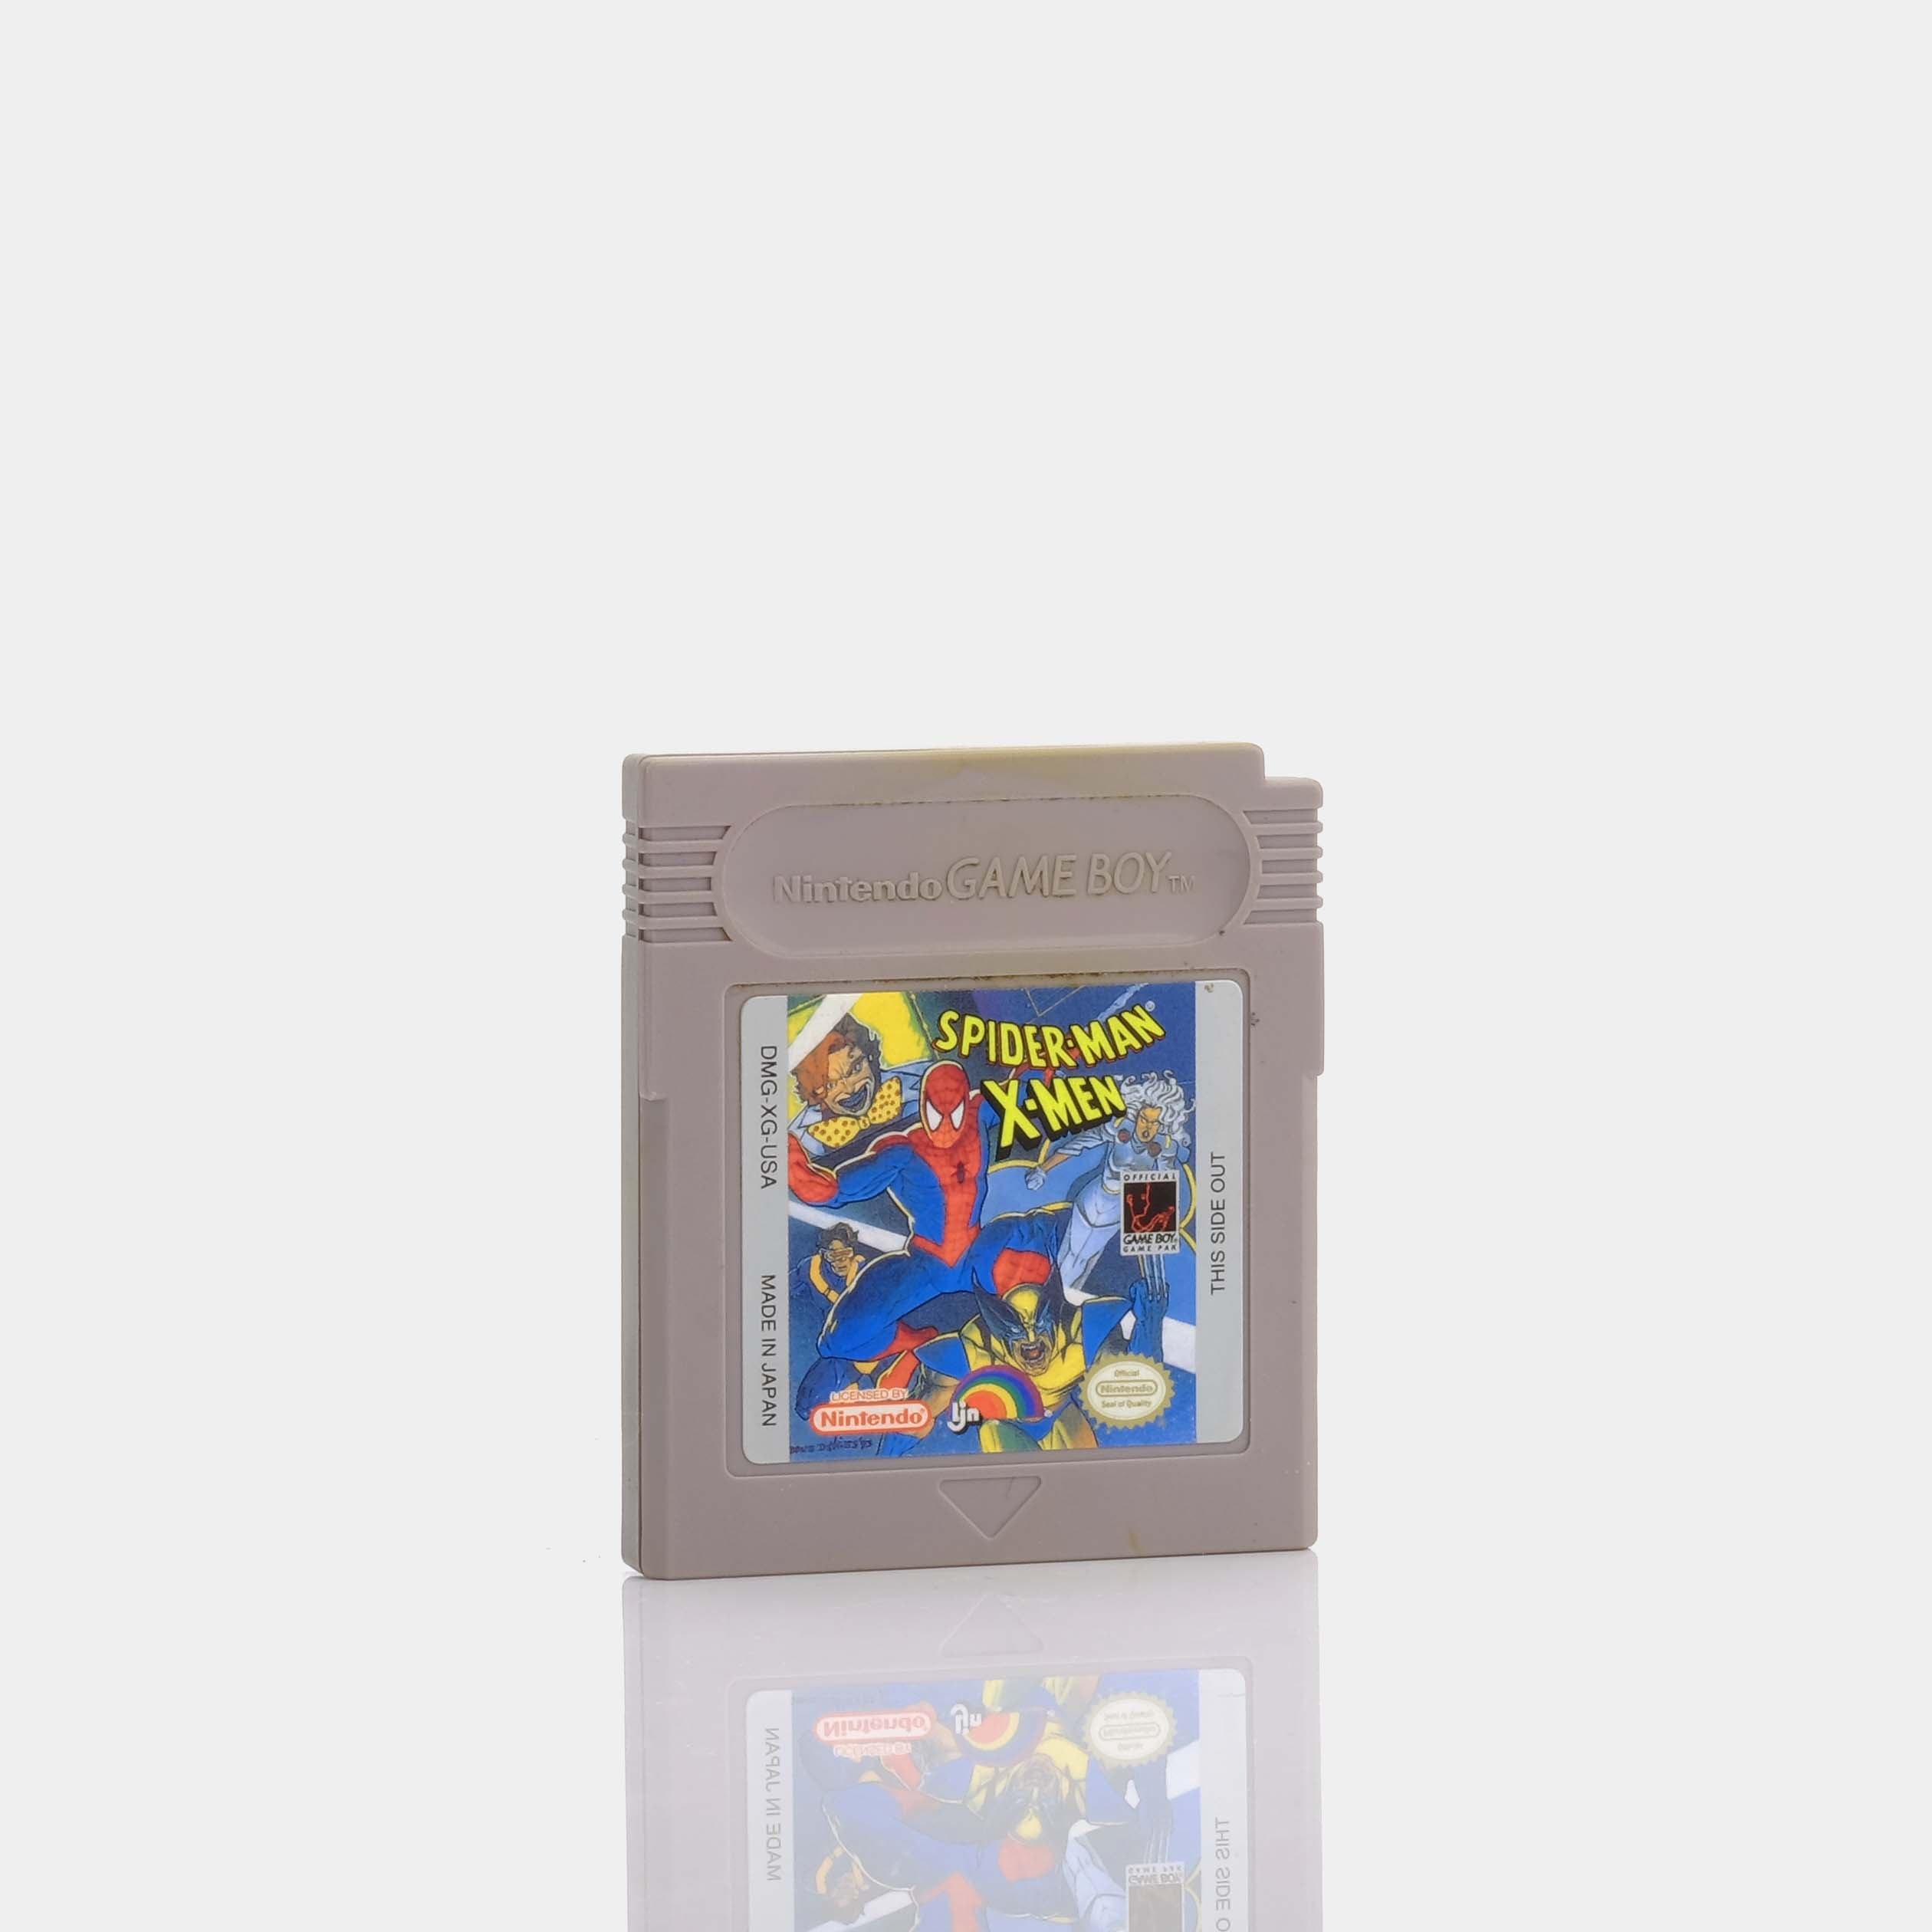 Spiderman and the X-Men in Arcades Revenge (1994) Game Boy Game